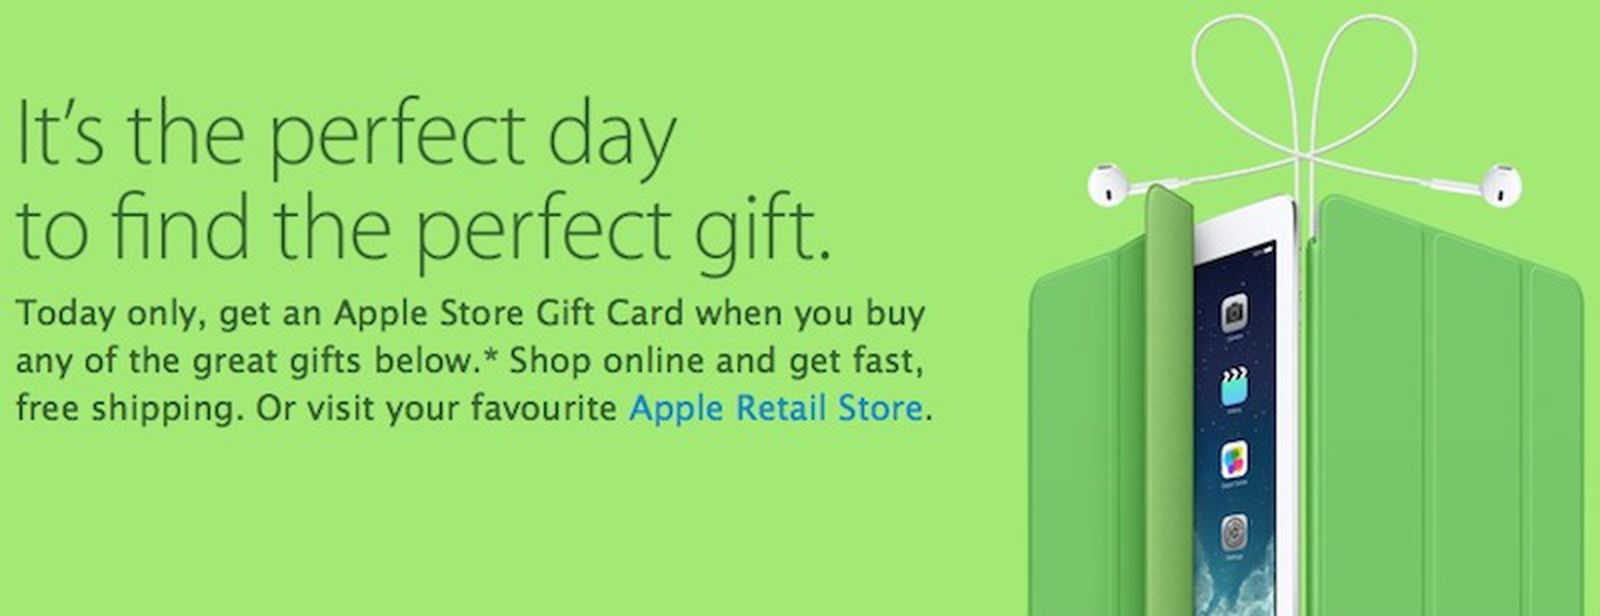 Apple's Black Friday Sales Begin Launching Internationally with Gift